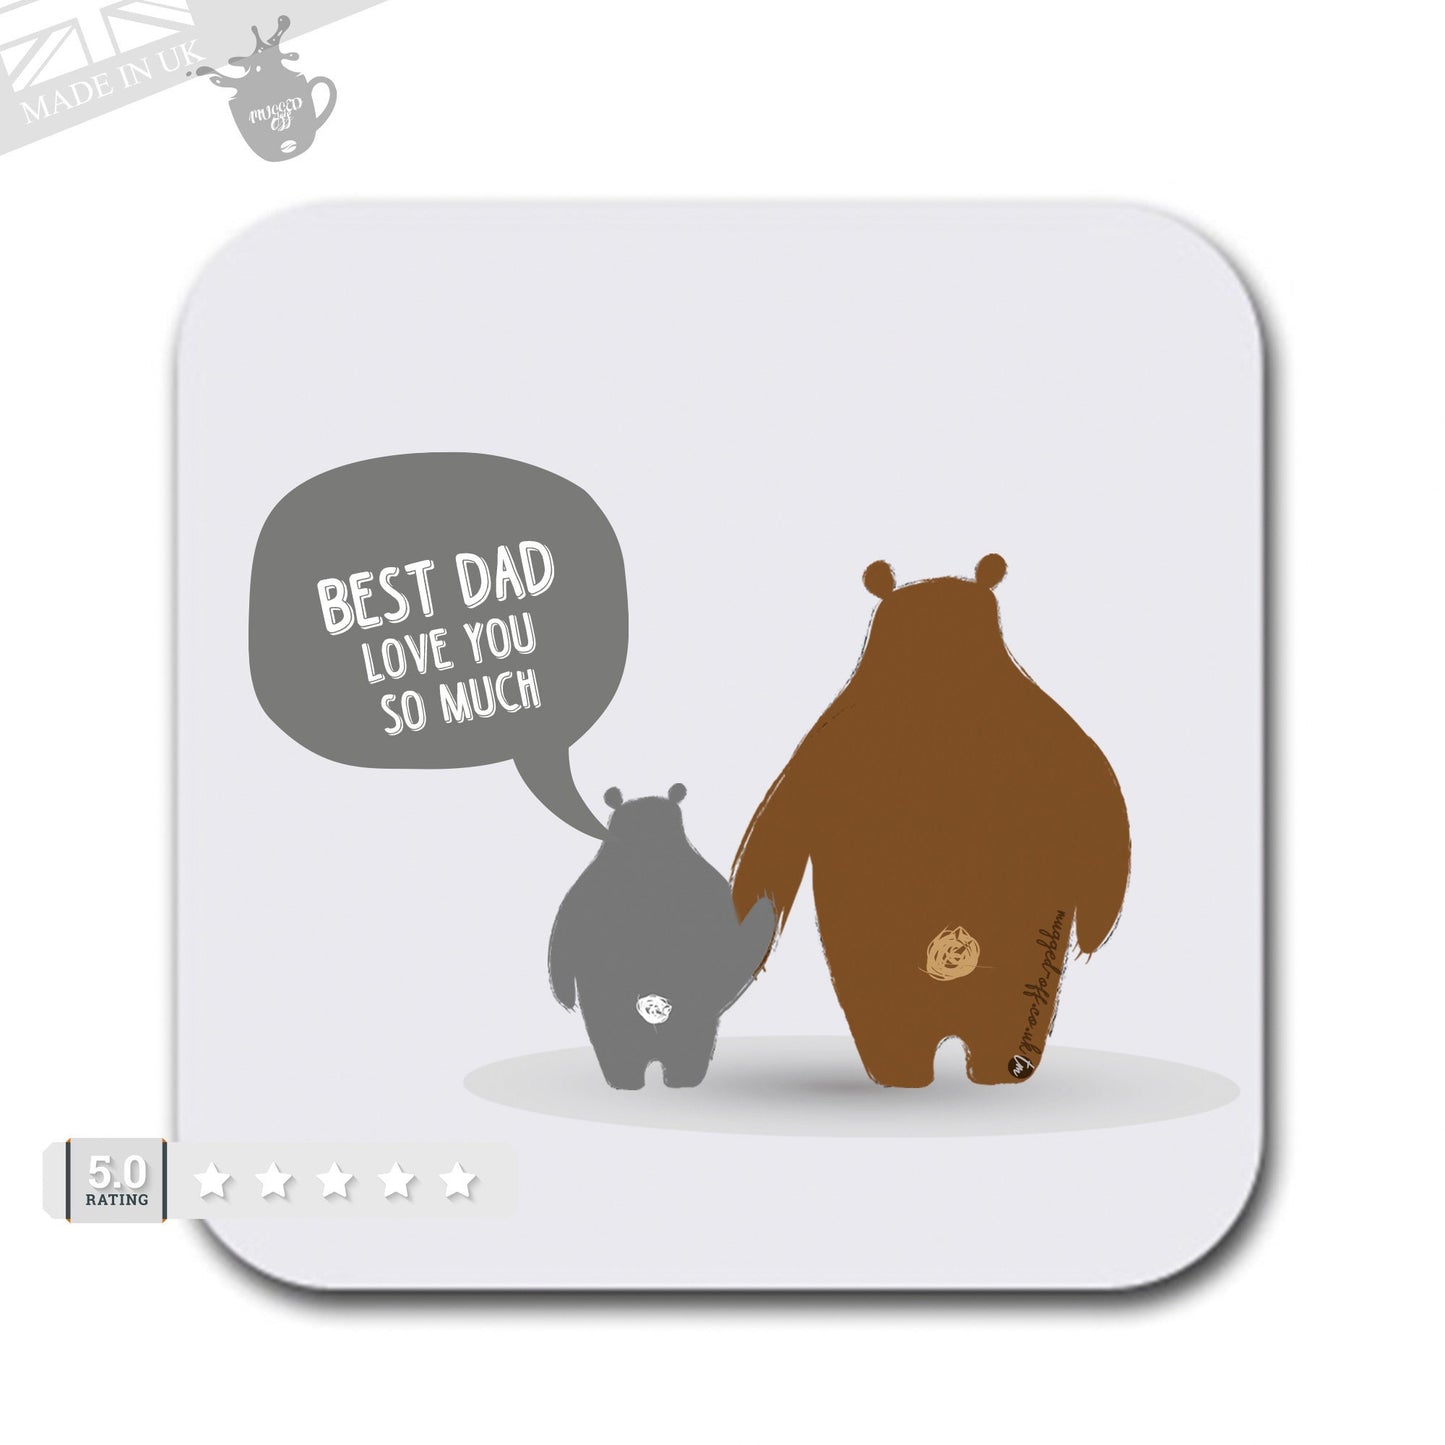 Dad Coaster Best Dad love you so much Xmas Birthday Christmas - Set of 2 Coasters